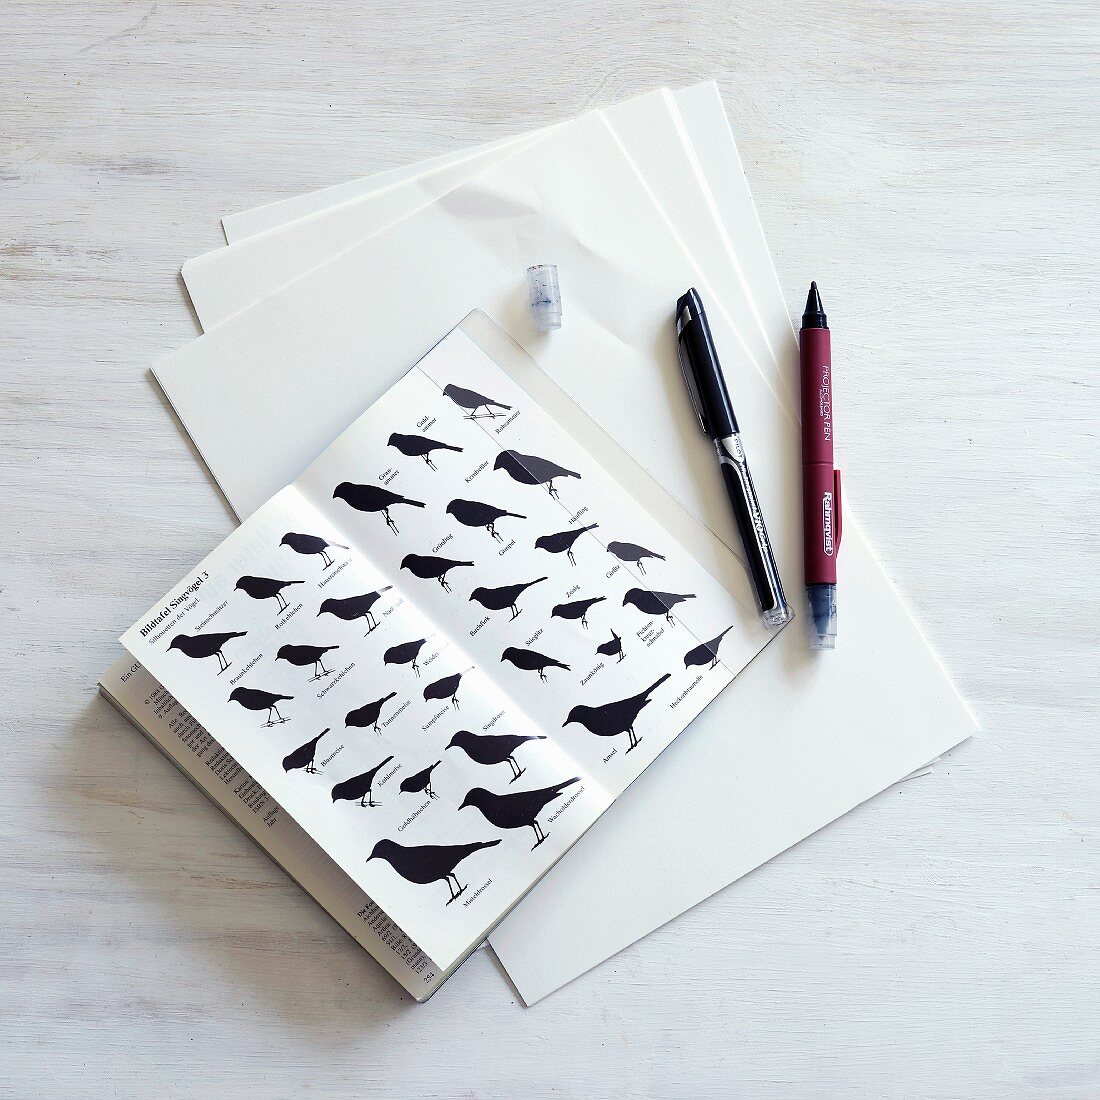 Pens next to book containing various illustrations of birds